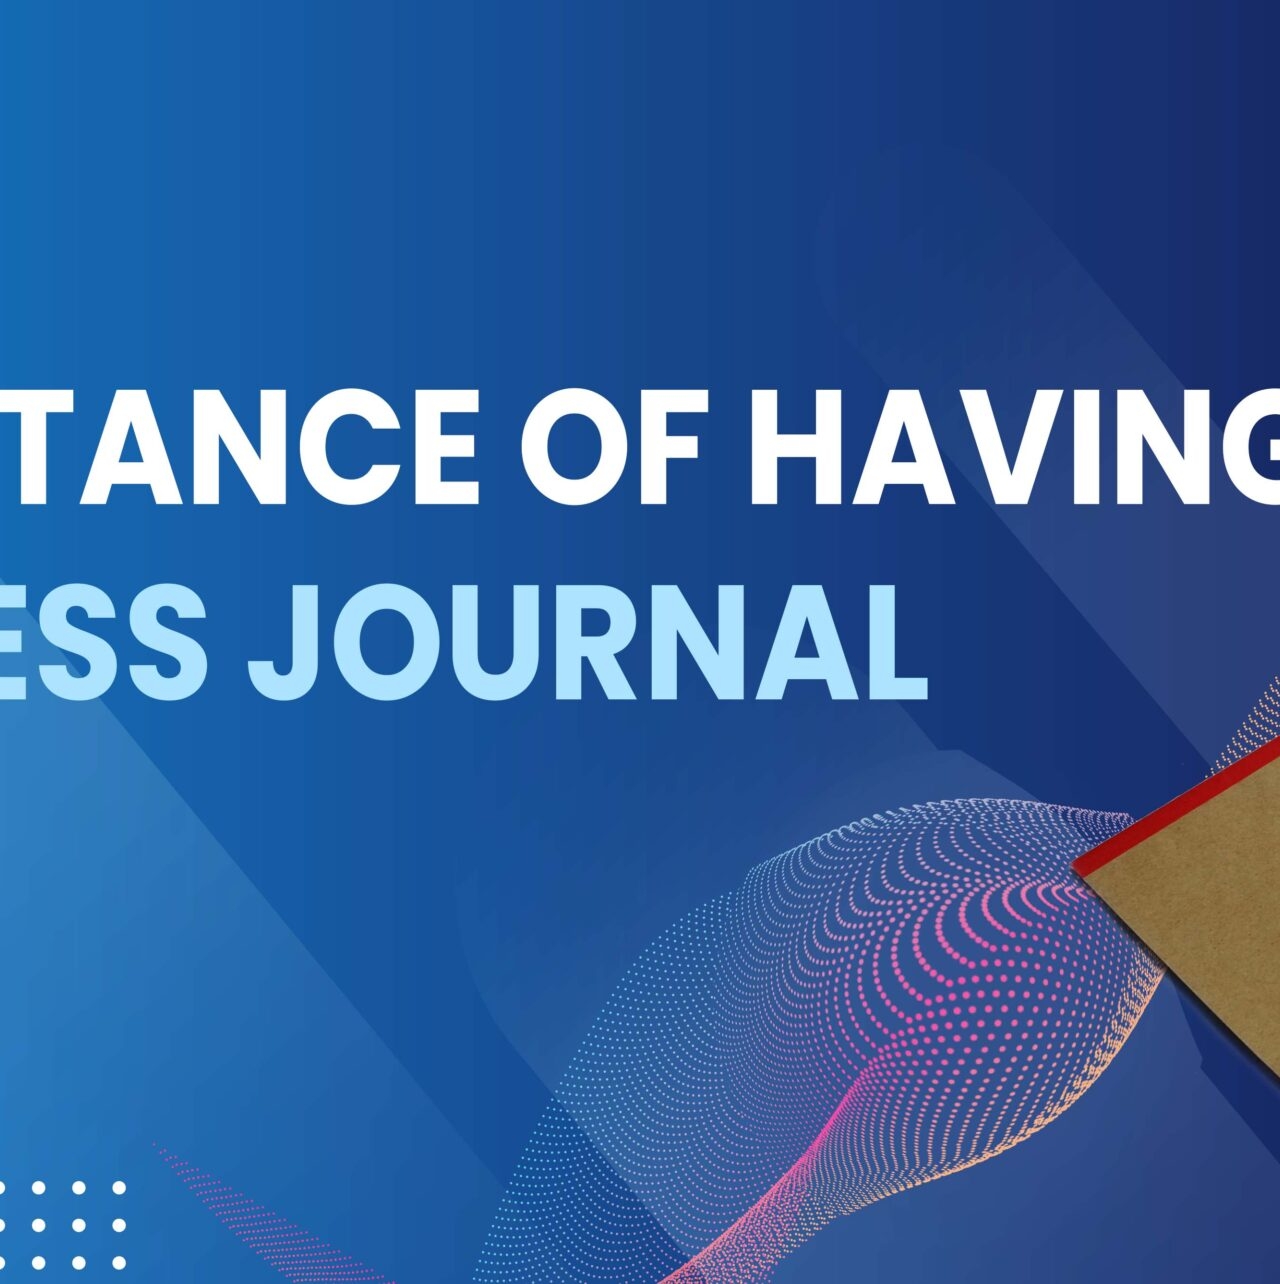 Importance of having a business journal